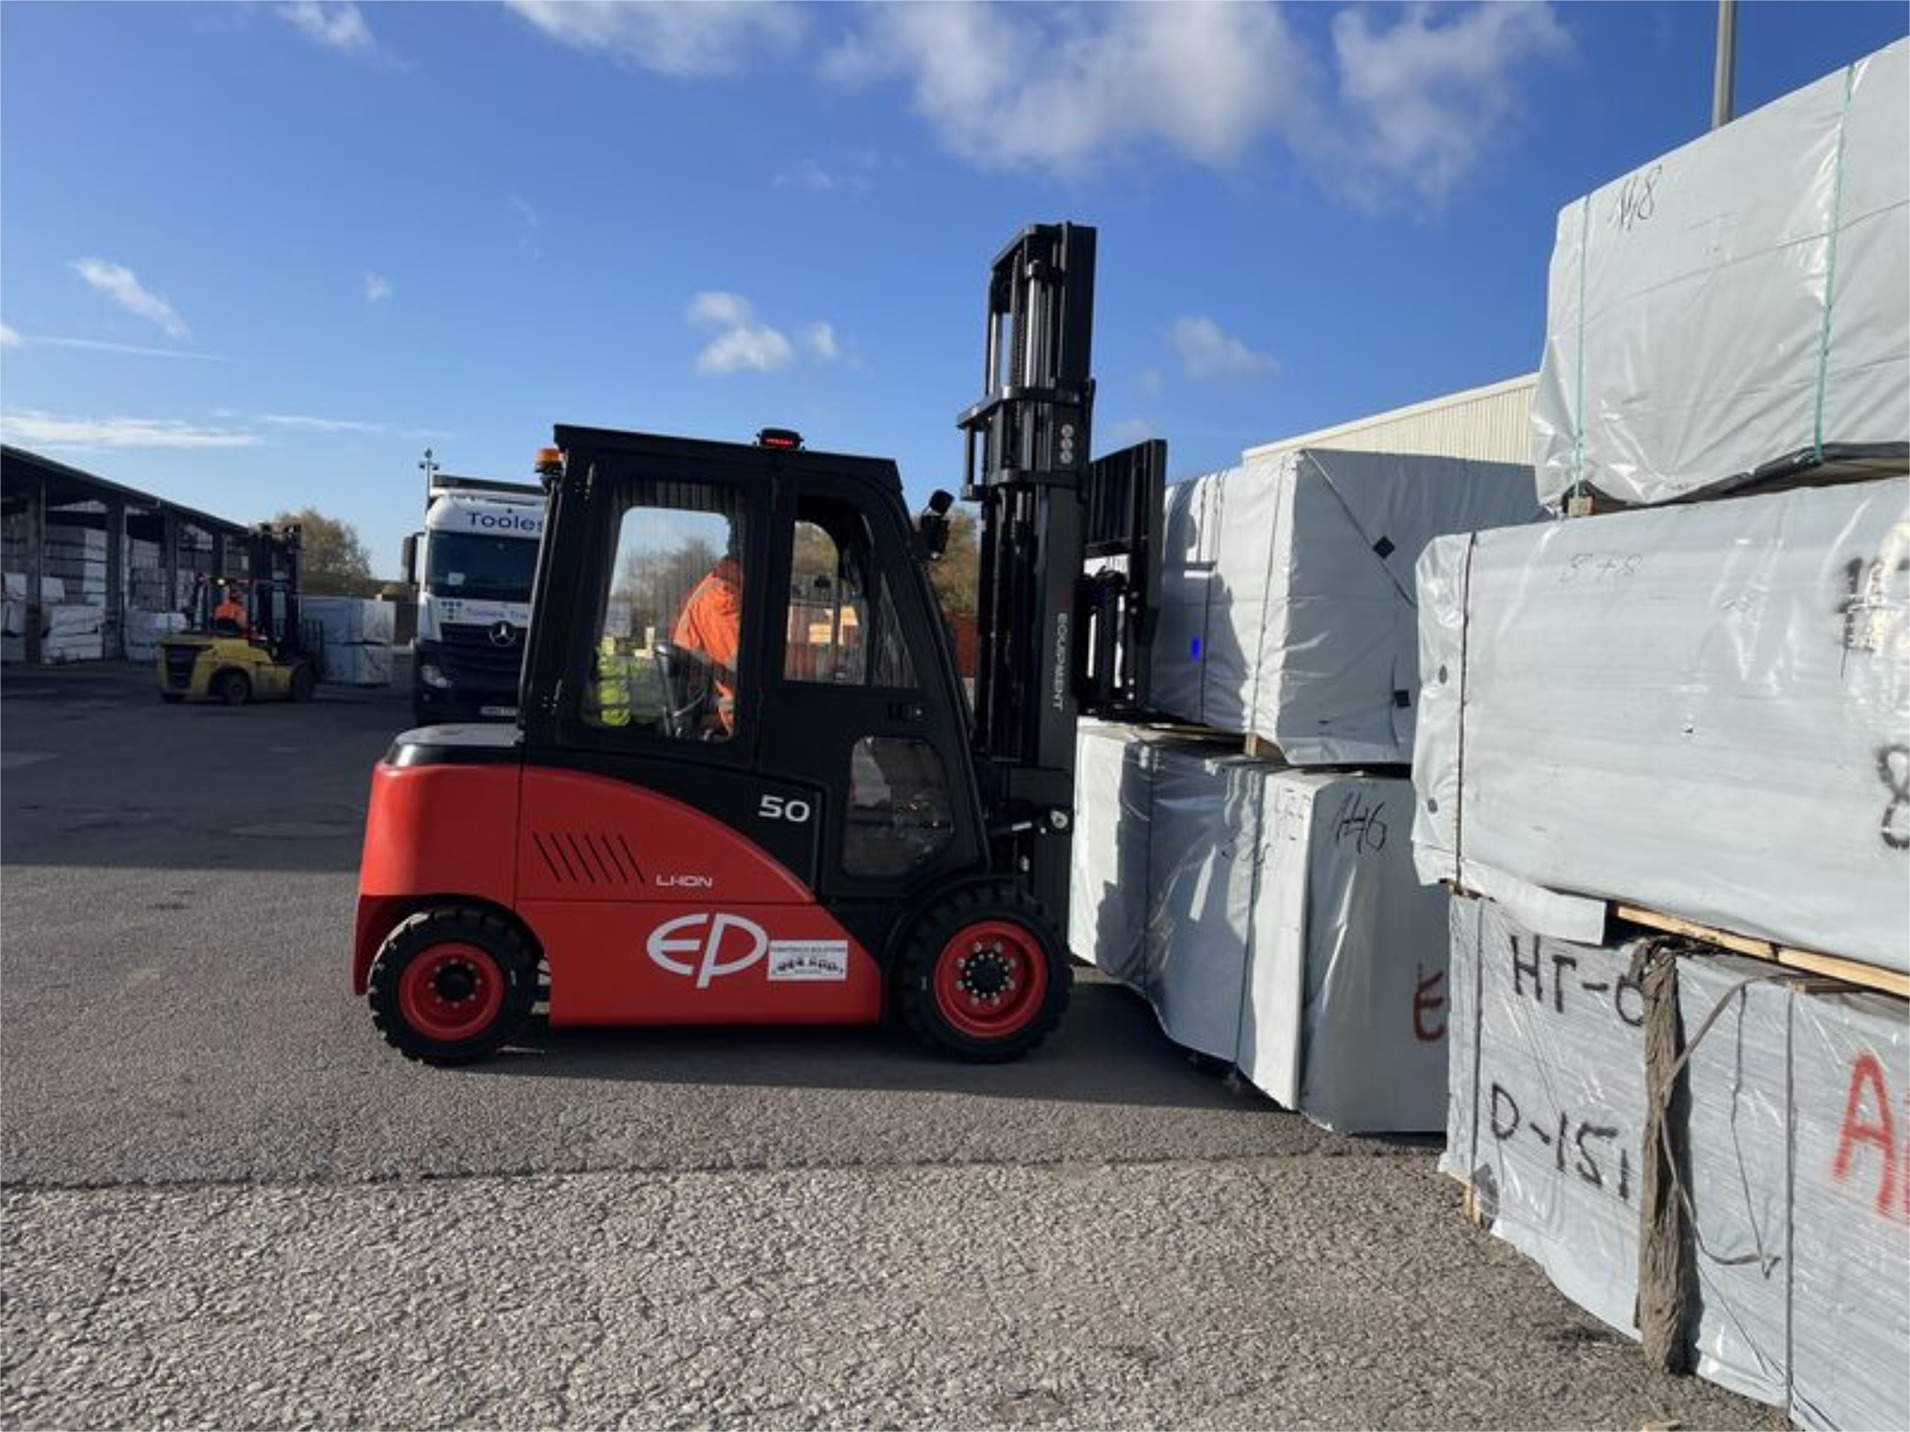 CPD45/50F8 forklift truck in operation.